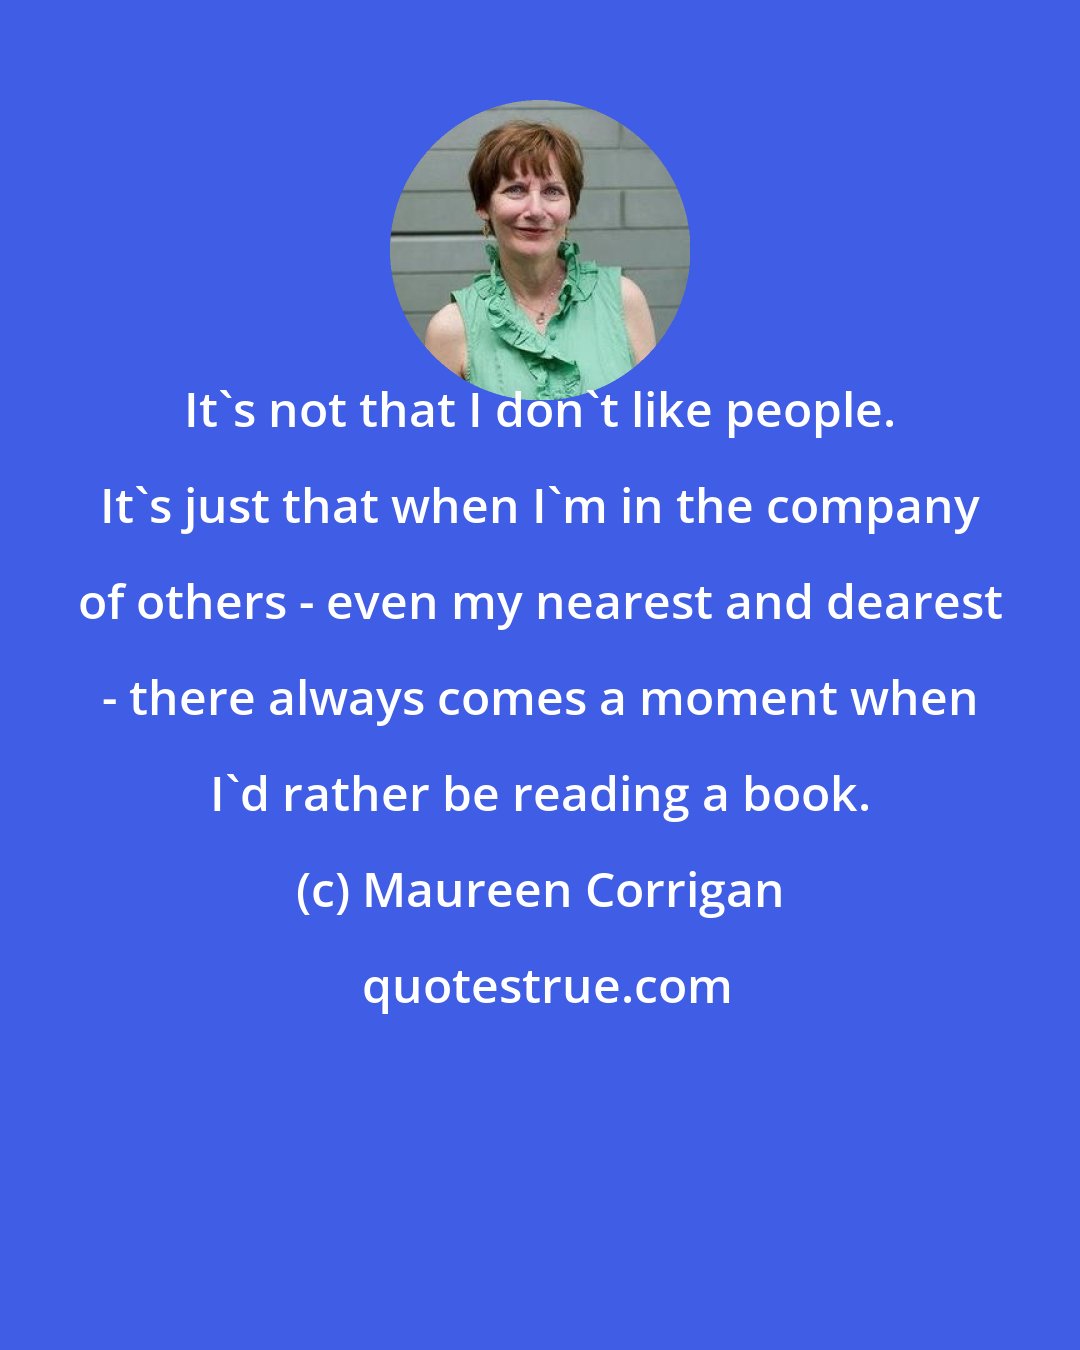 Maureen Corrigan: It's not that I don't like people. It's just that when I'm in the company of others - even my nearest and dearest - there always comes a moment when I'd rather be reading a book.